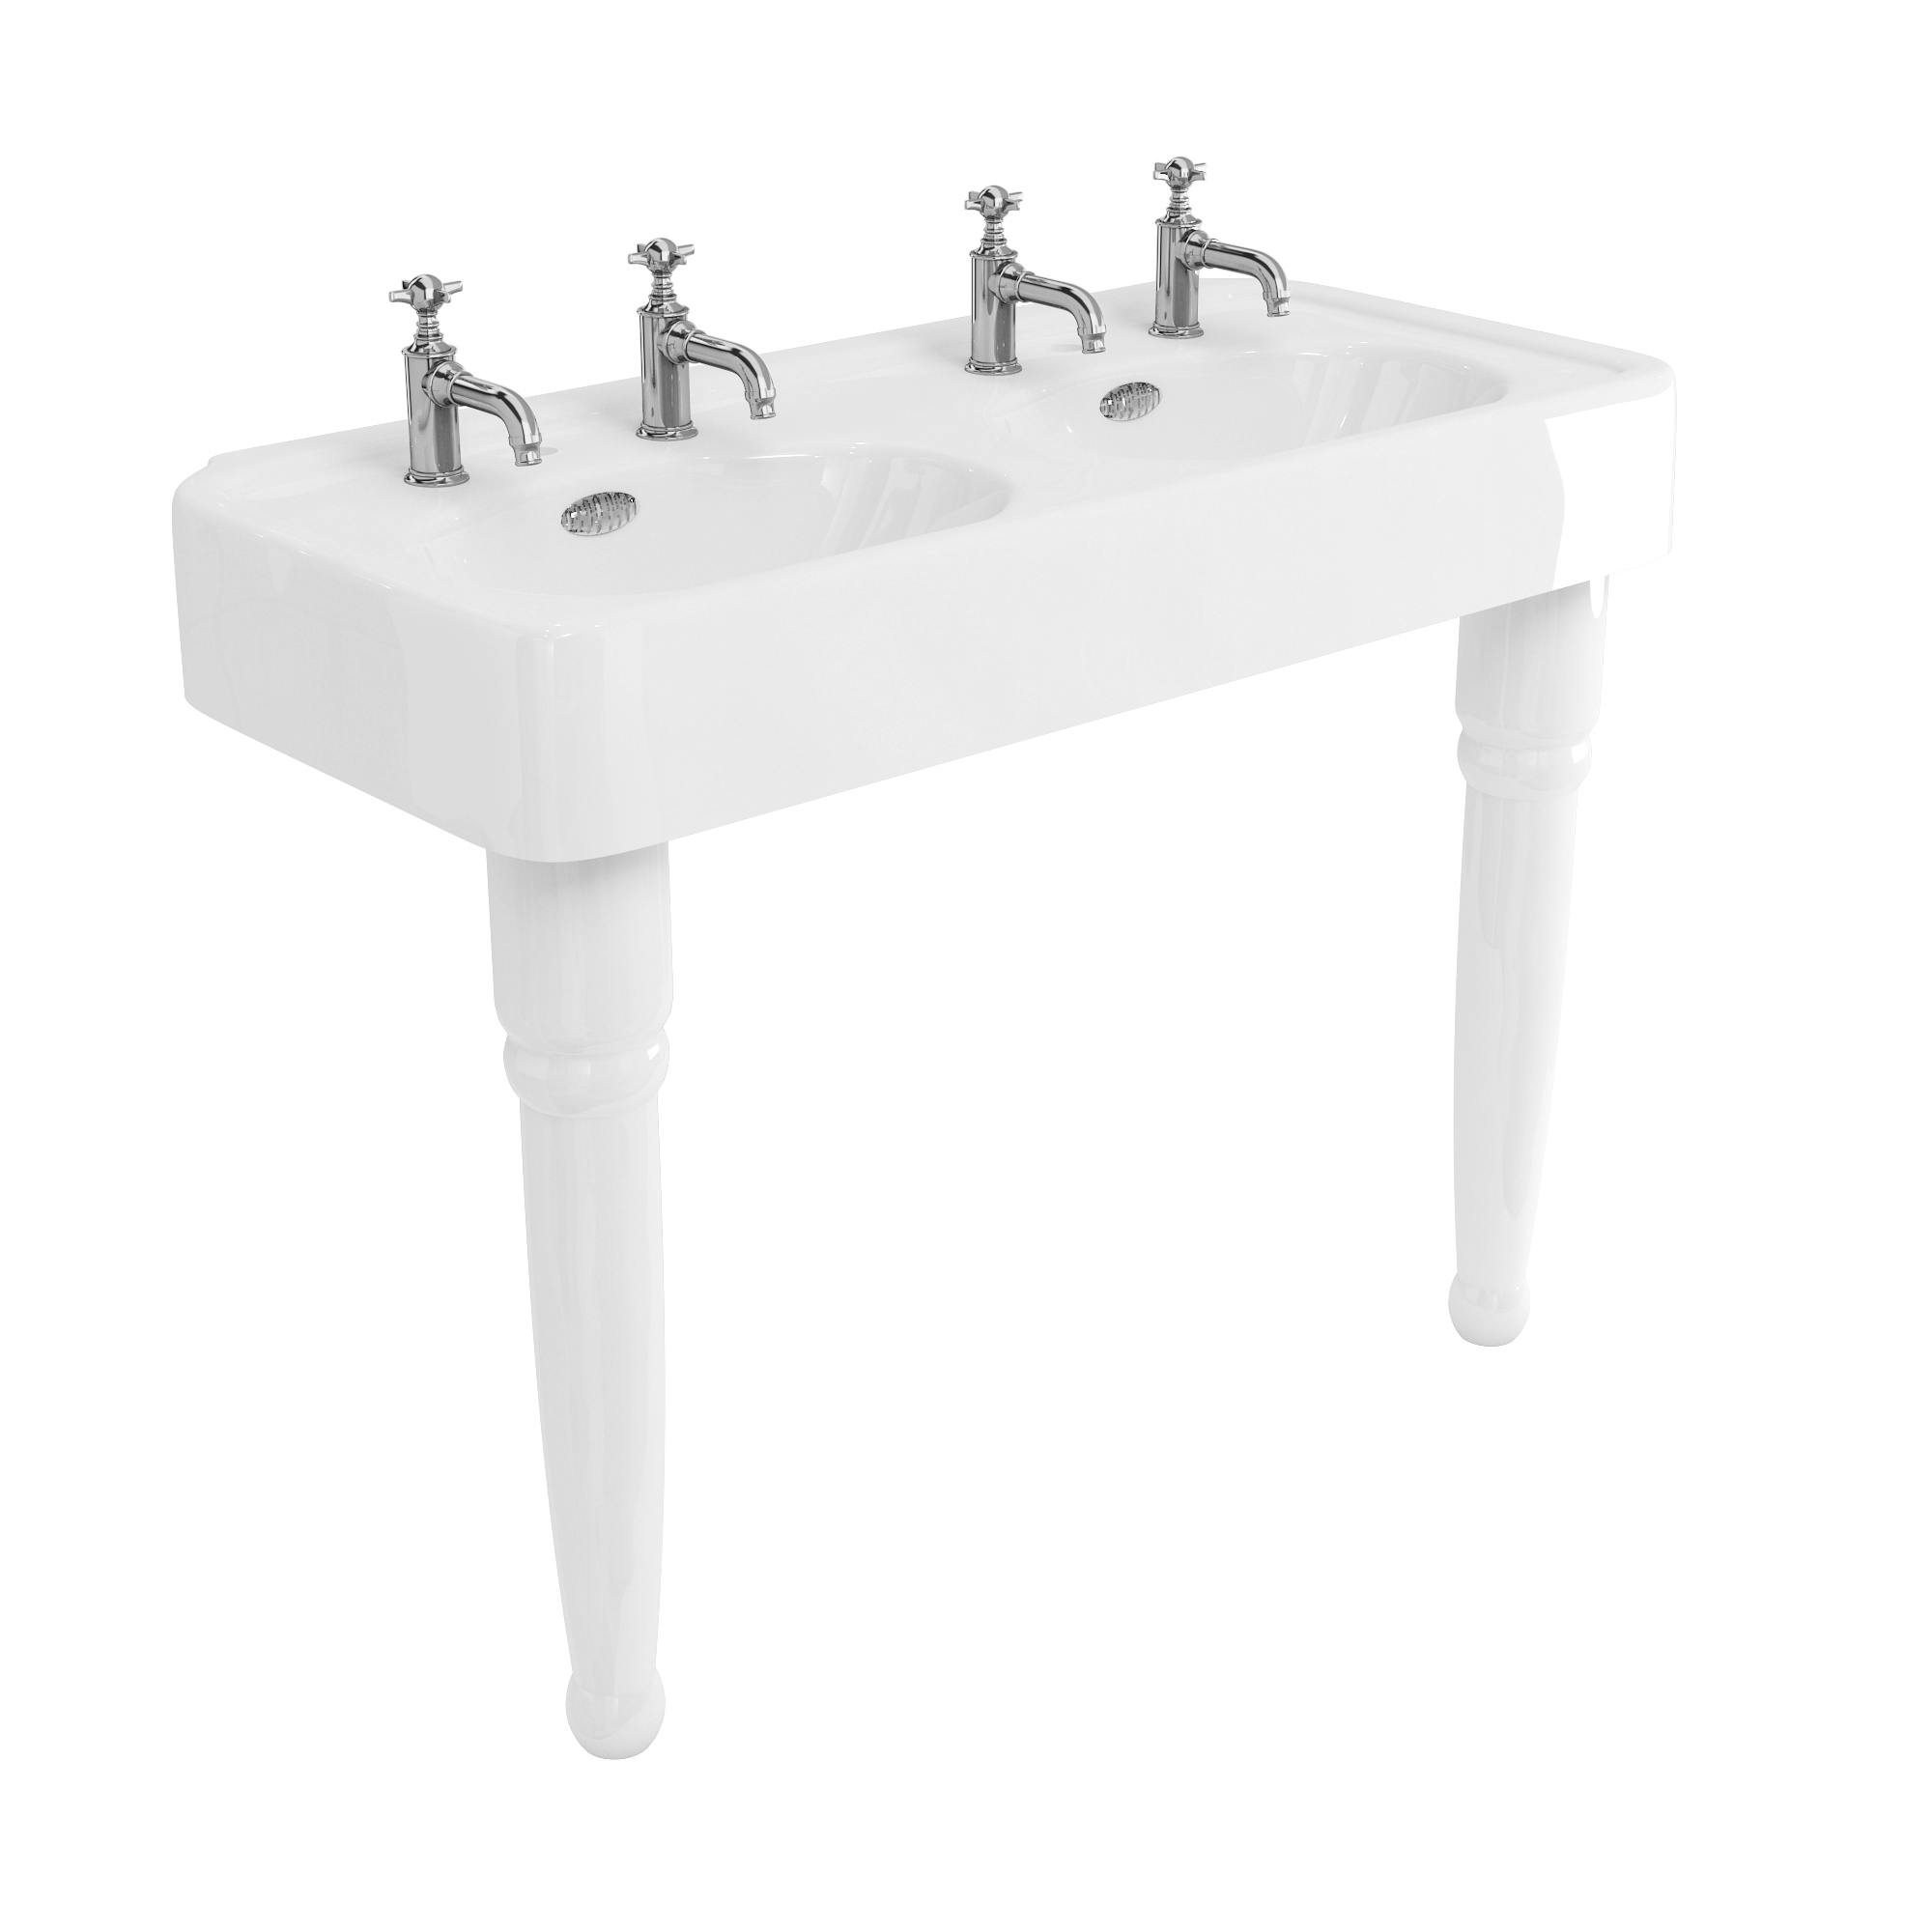 Arcade 1200mm basin with chrome overflow & ceramic console legs